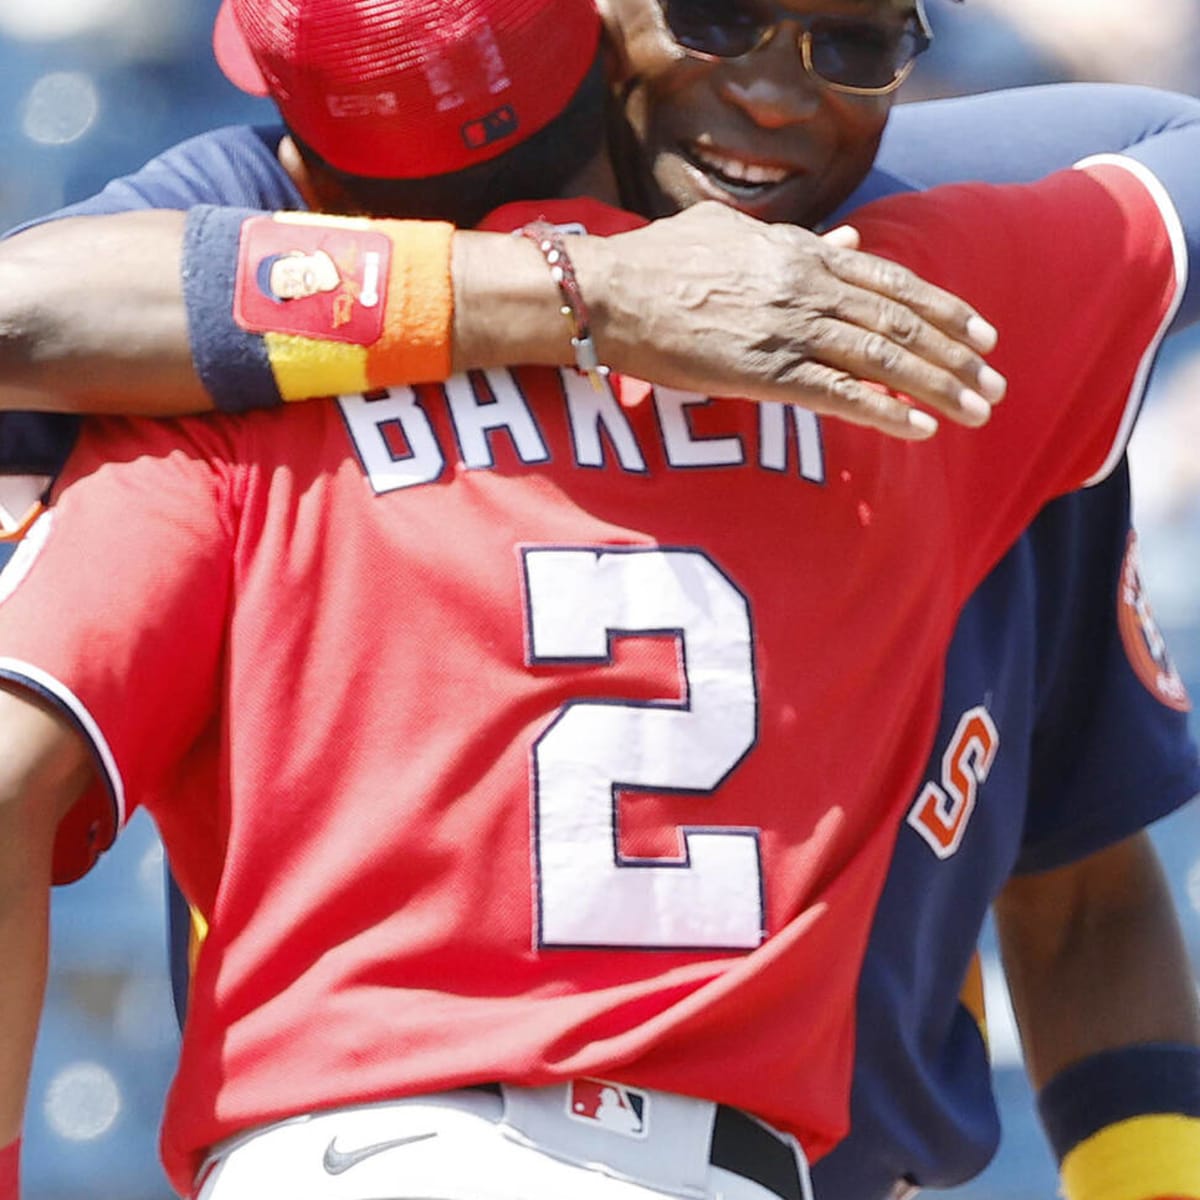 Astros' Dusty Baker shares touching moment with son Darren in